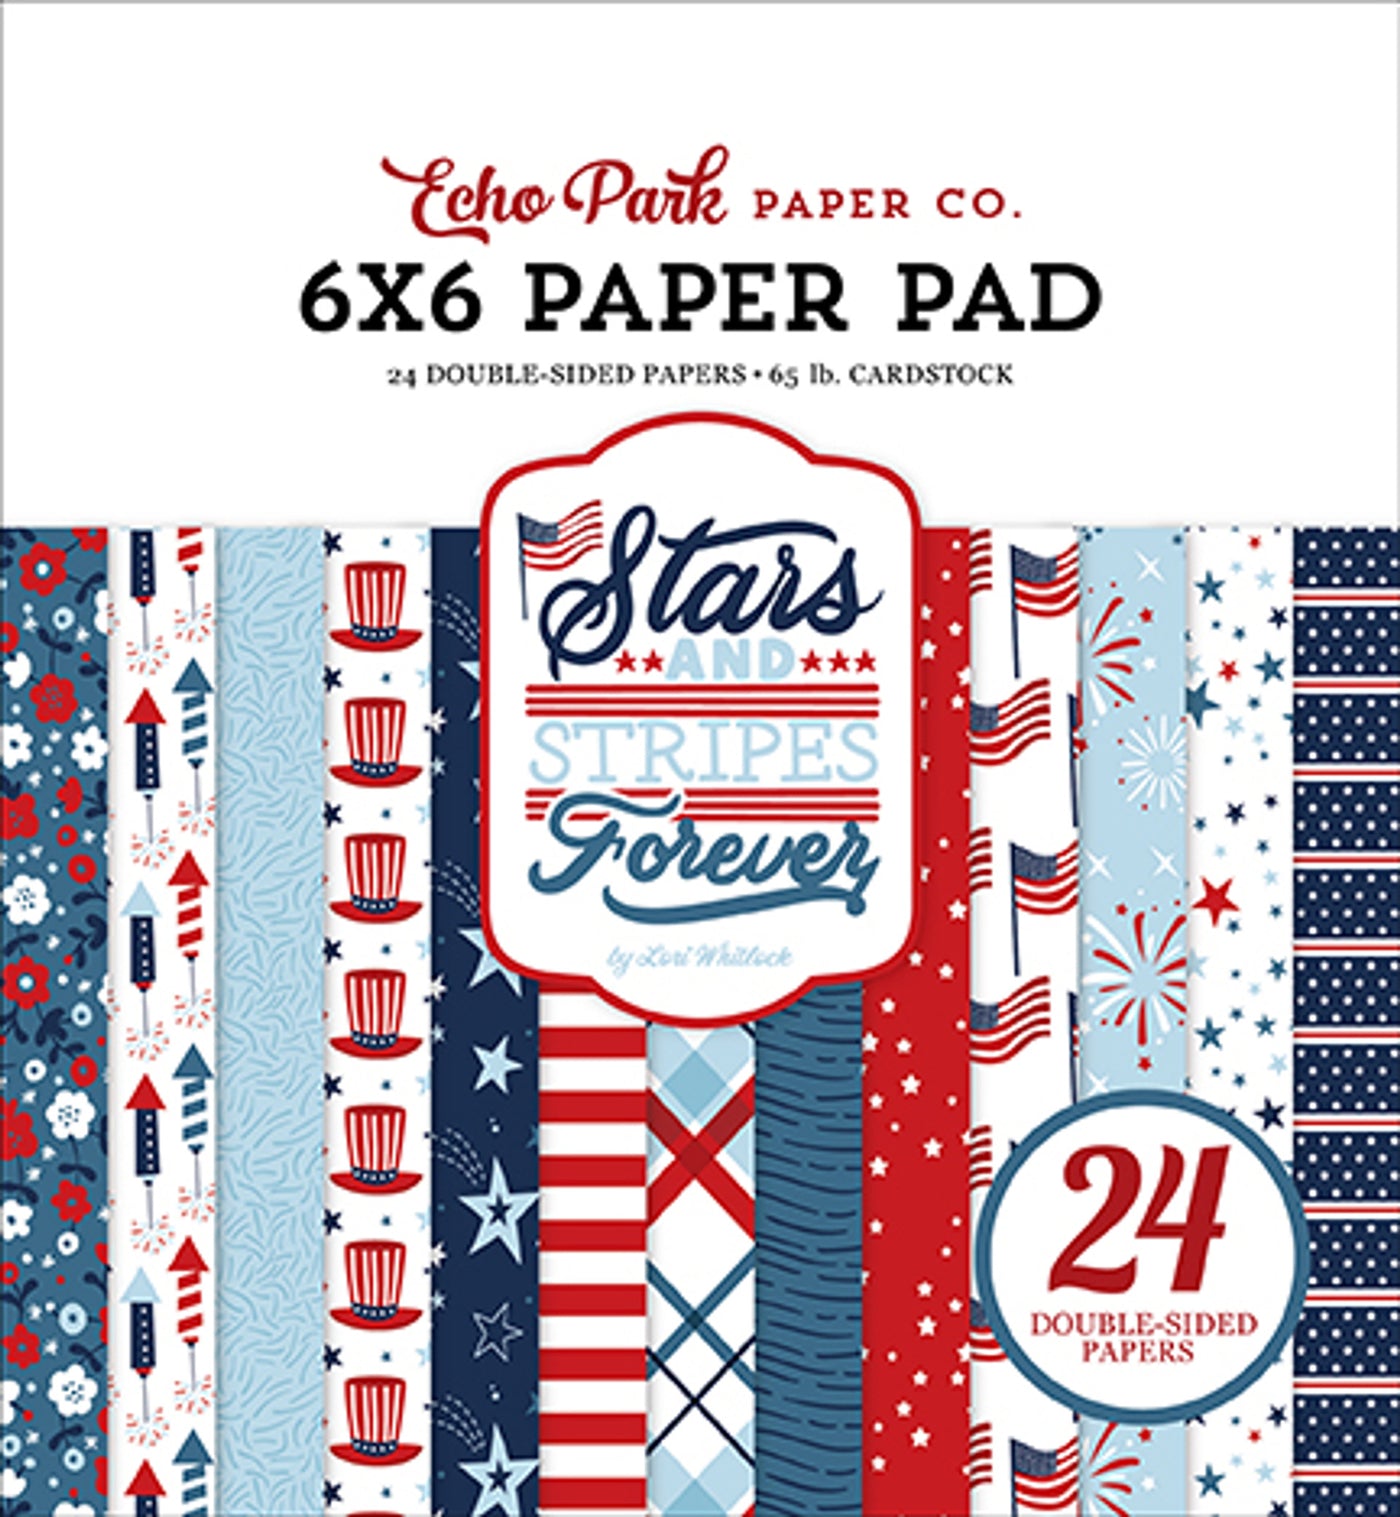 Red, white and blue patterns and designs help celebrate our wonderful country. 6x6 pad with 24 double-sided pages great for paper crafts.